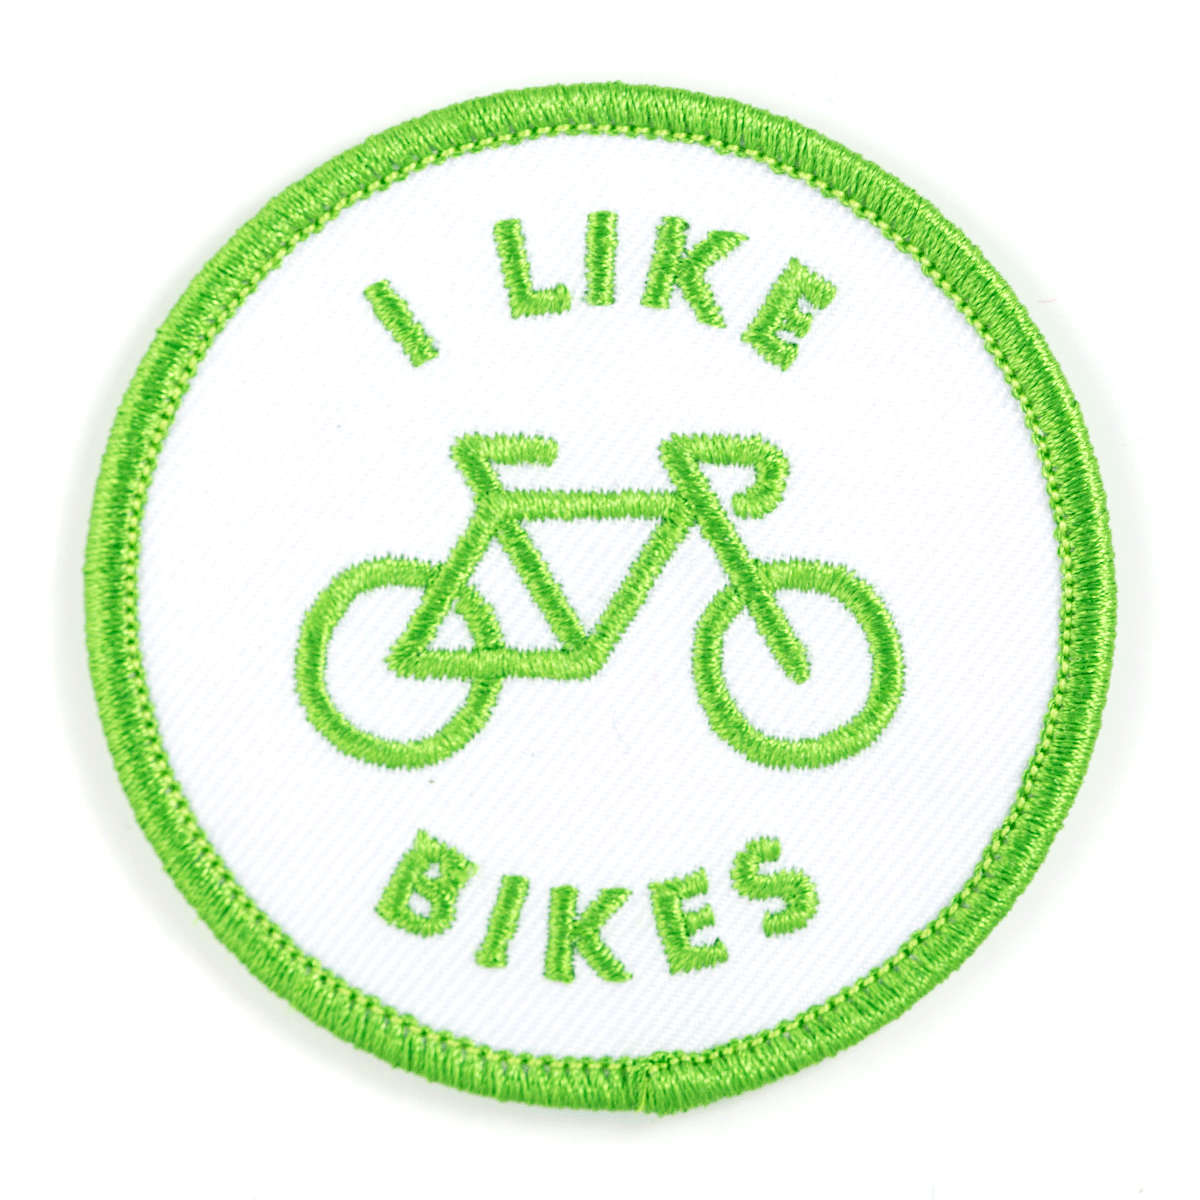 I Like Bikes Embroidered Iron-On Patch - homesewn